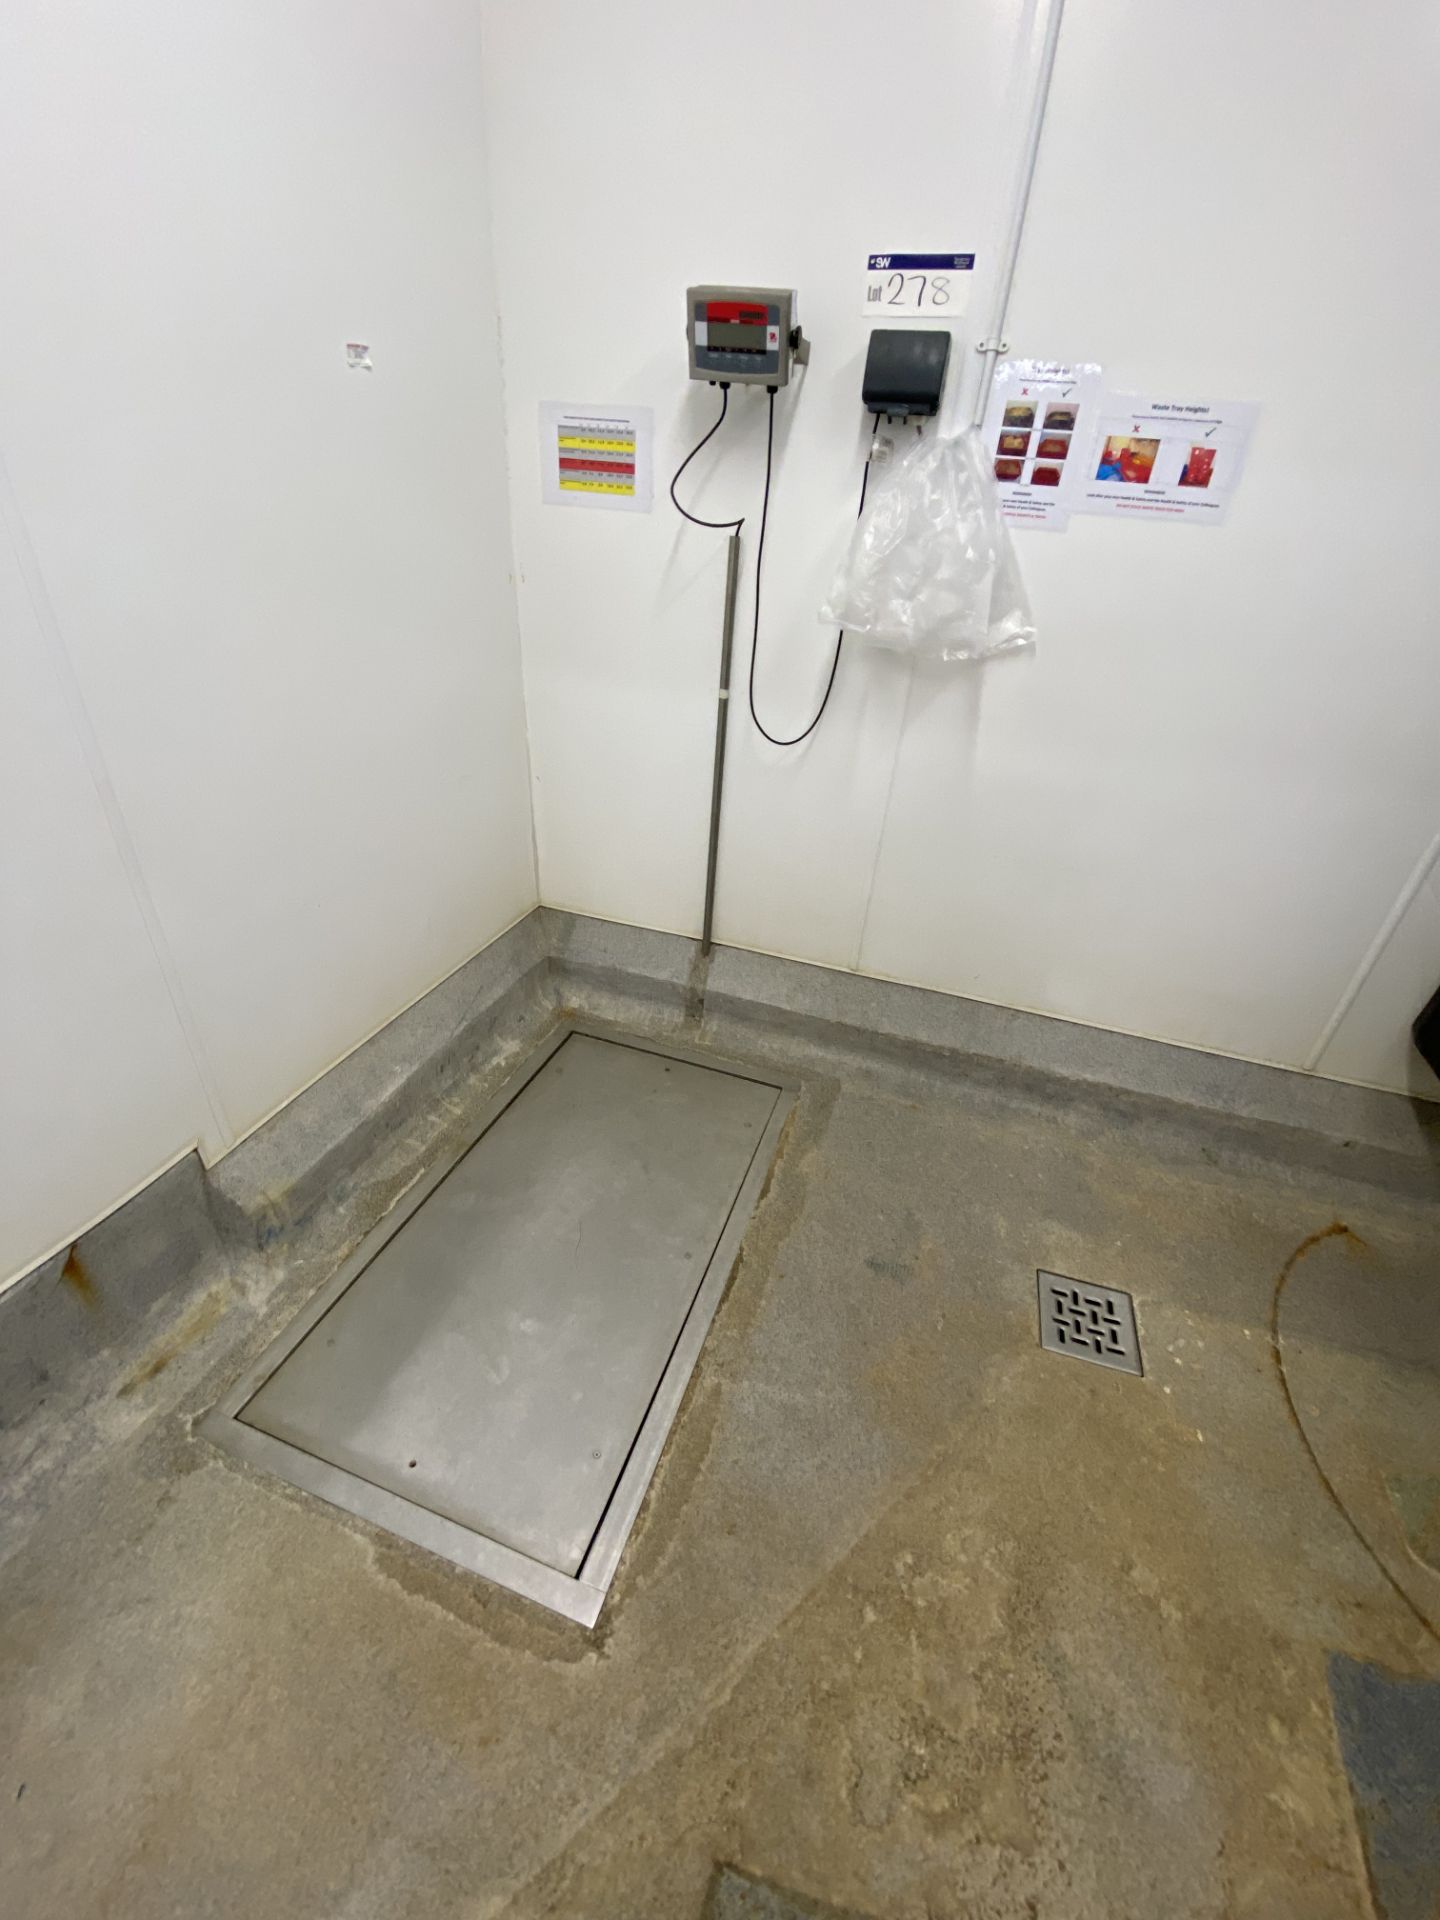 Stainless Steel Weighing Platform, approx. 1.25m x 700mm, with Ohaus Defender 3000 Xtreme W